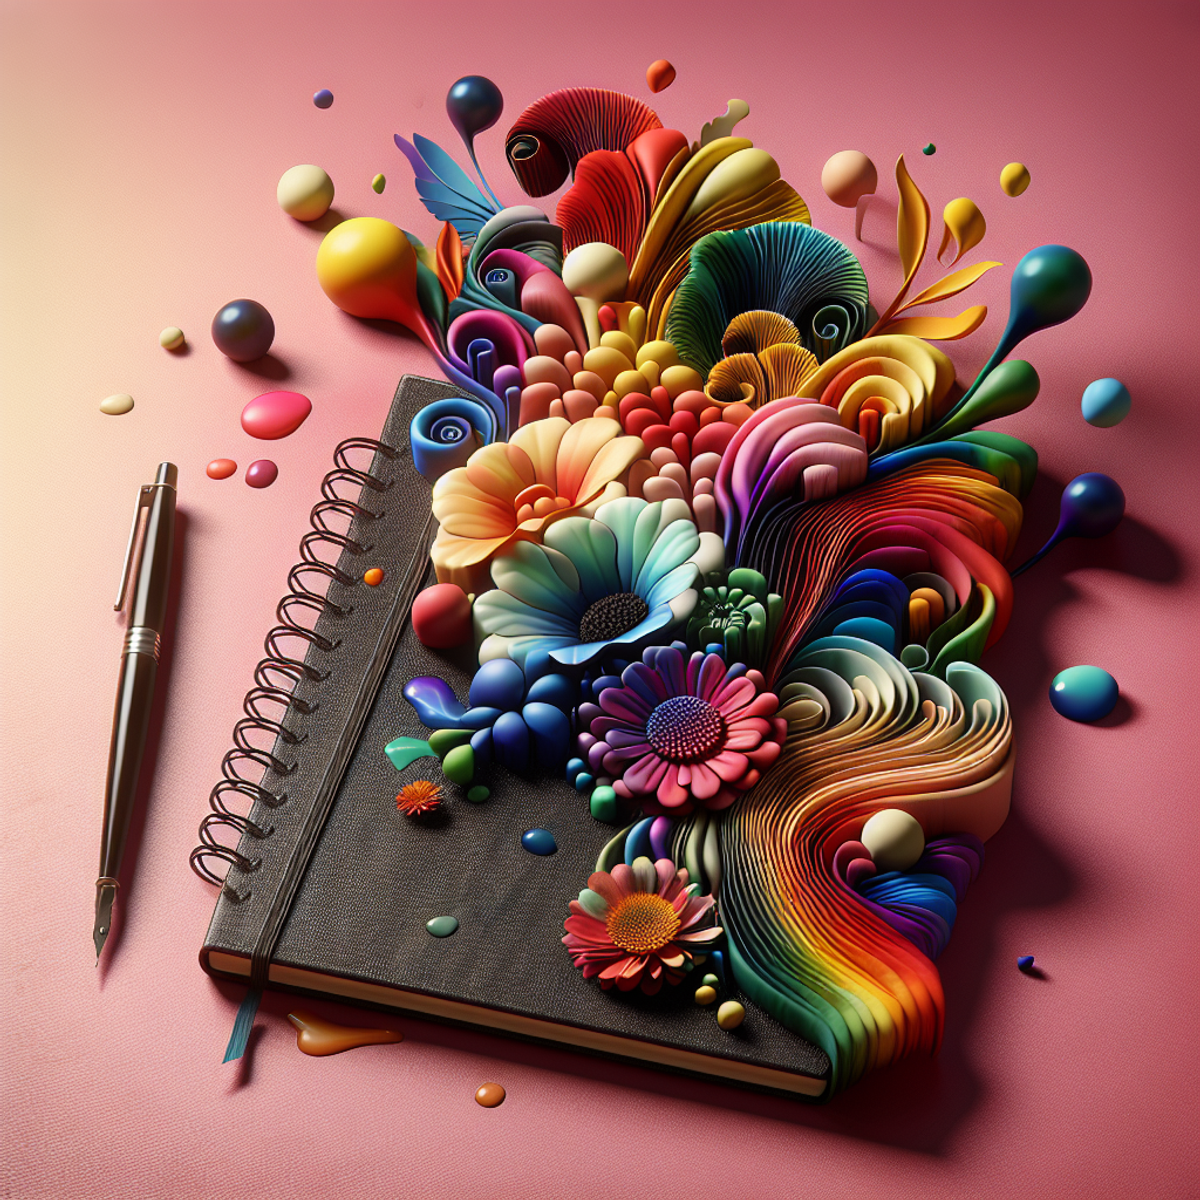 A colorful journal with a pen resting on top, surrounded by vibrant flowers and abstract shapes.